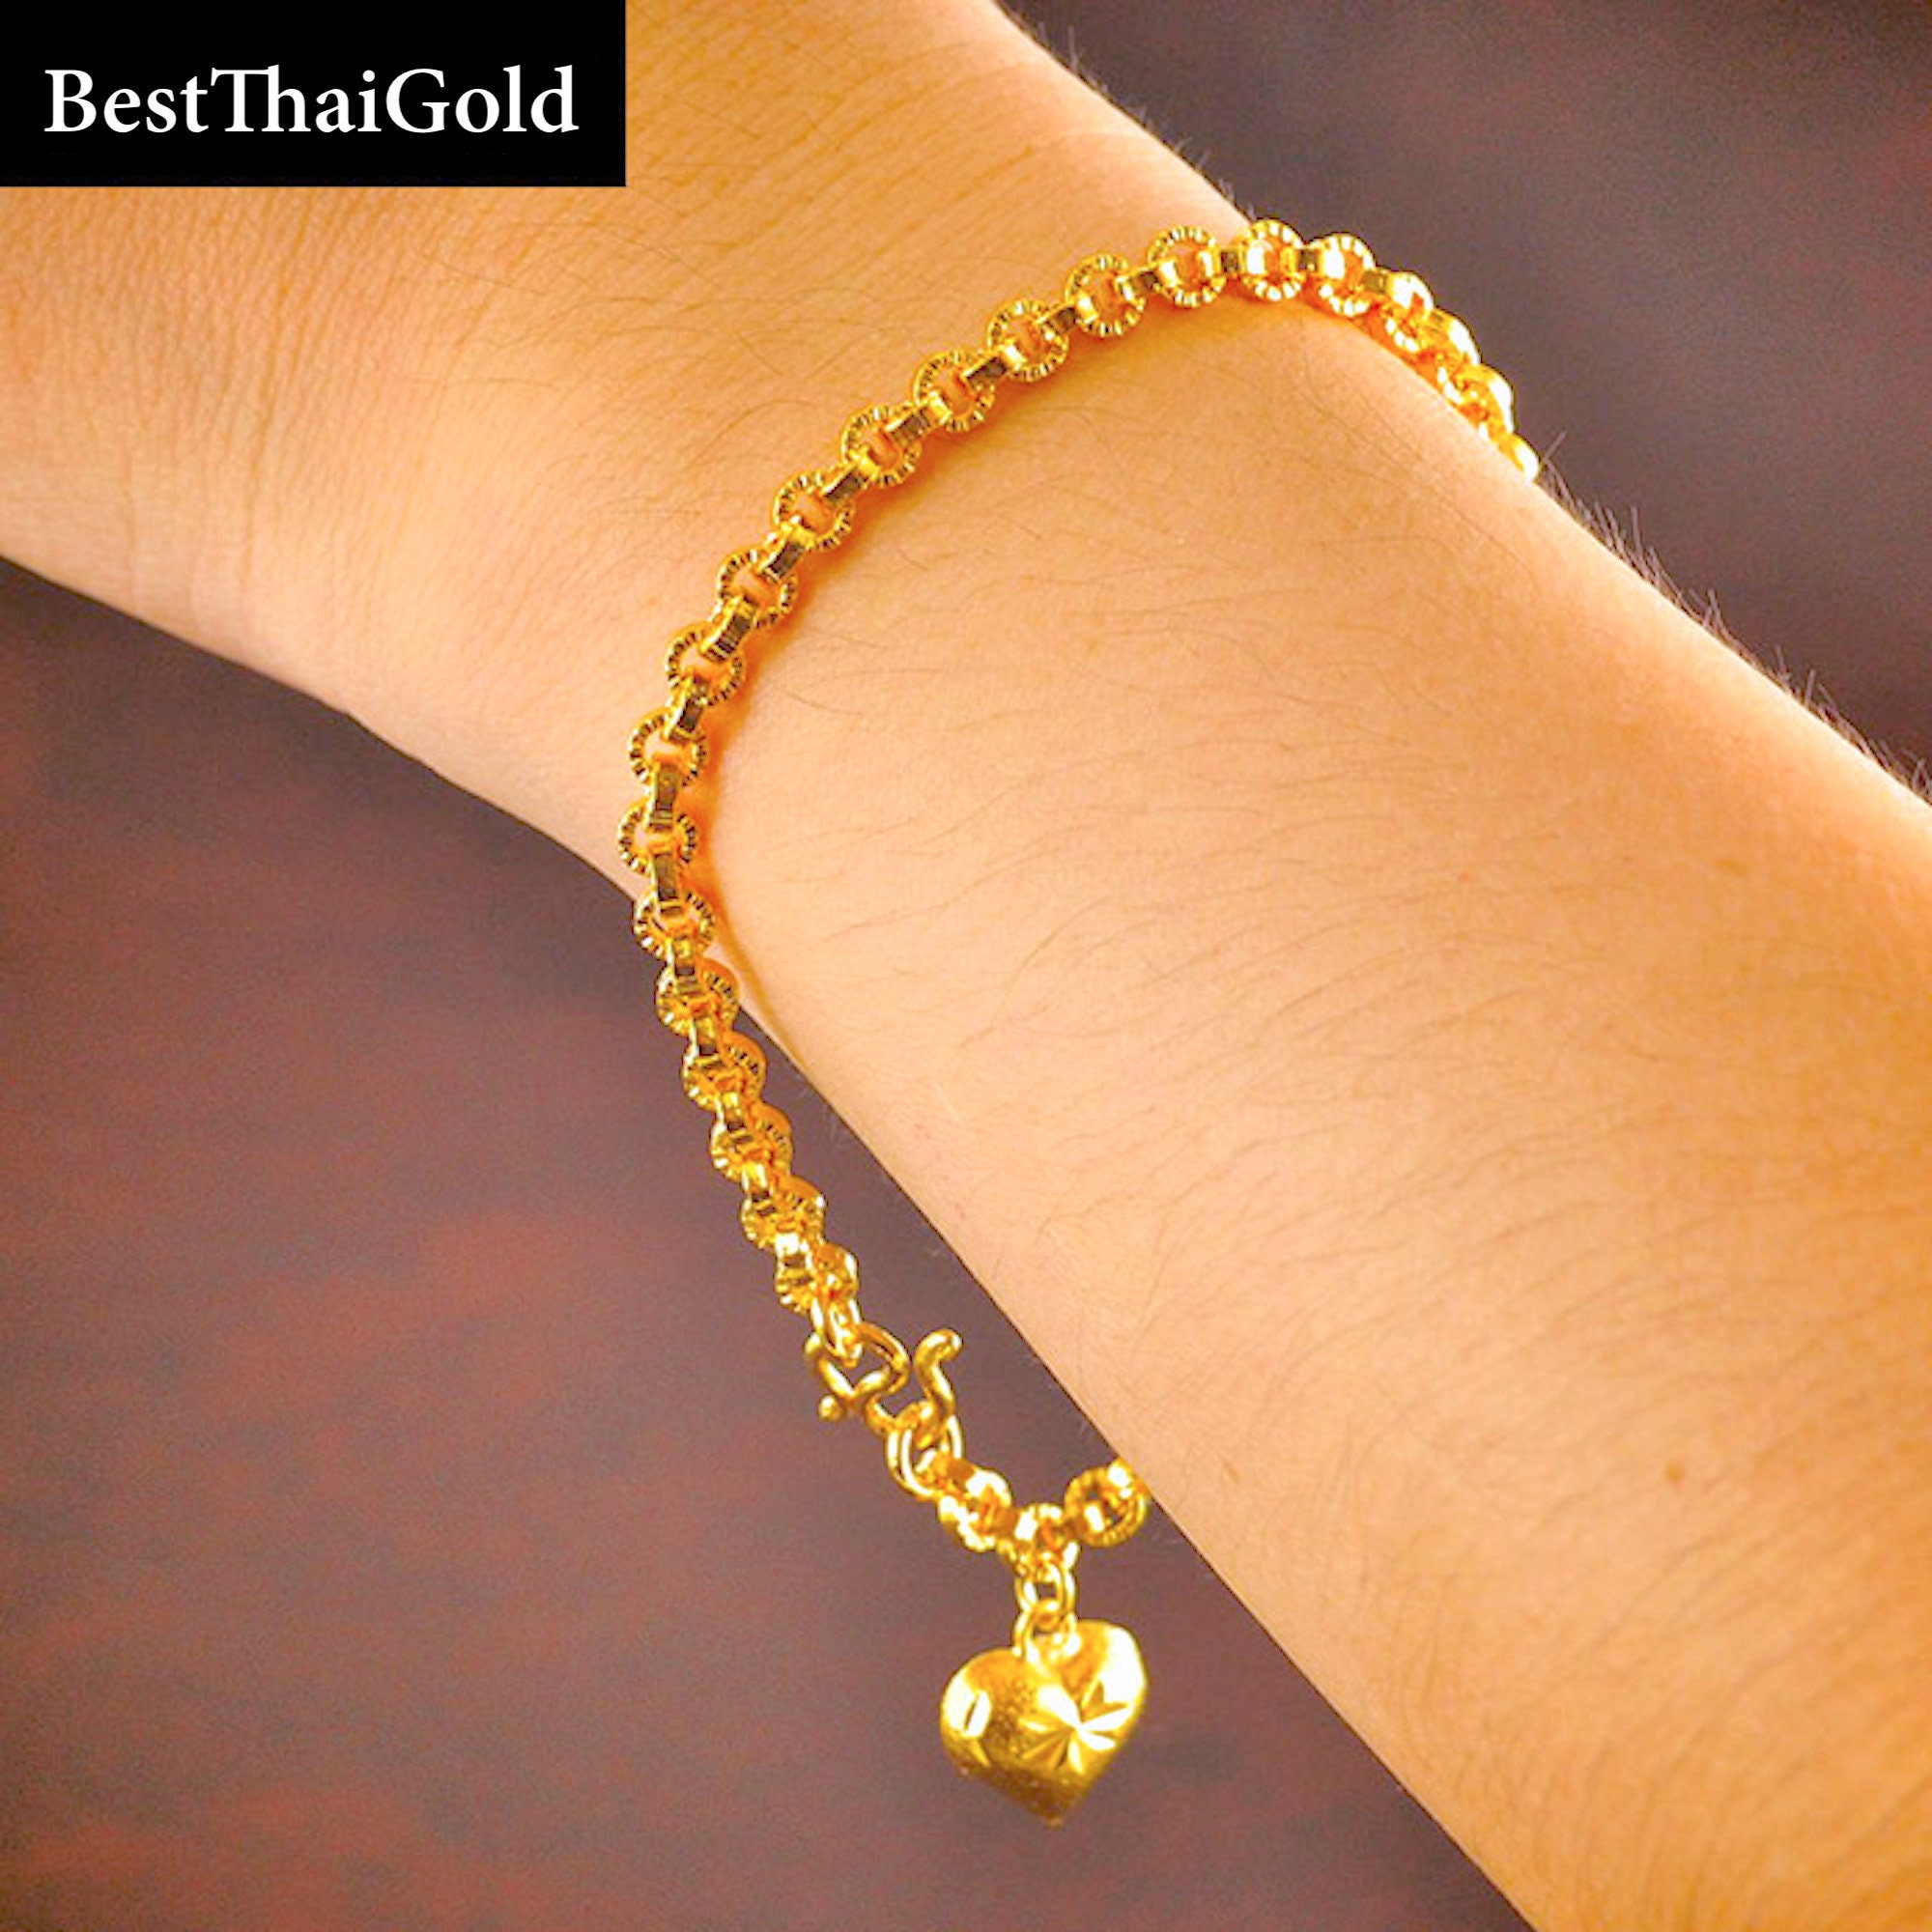 Amazon.com: GOWE Women 24k Gold Bracelet Genuine Pure 999 Gold Carambola  Female Bangle Girl Party Gift Good Nice Discount : Clothing, Shoes & Jewelry